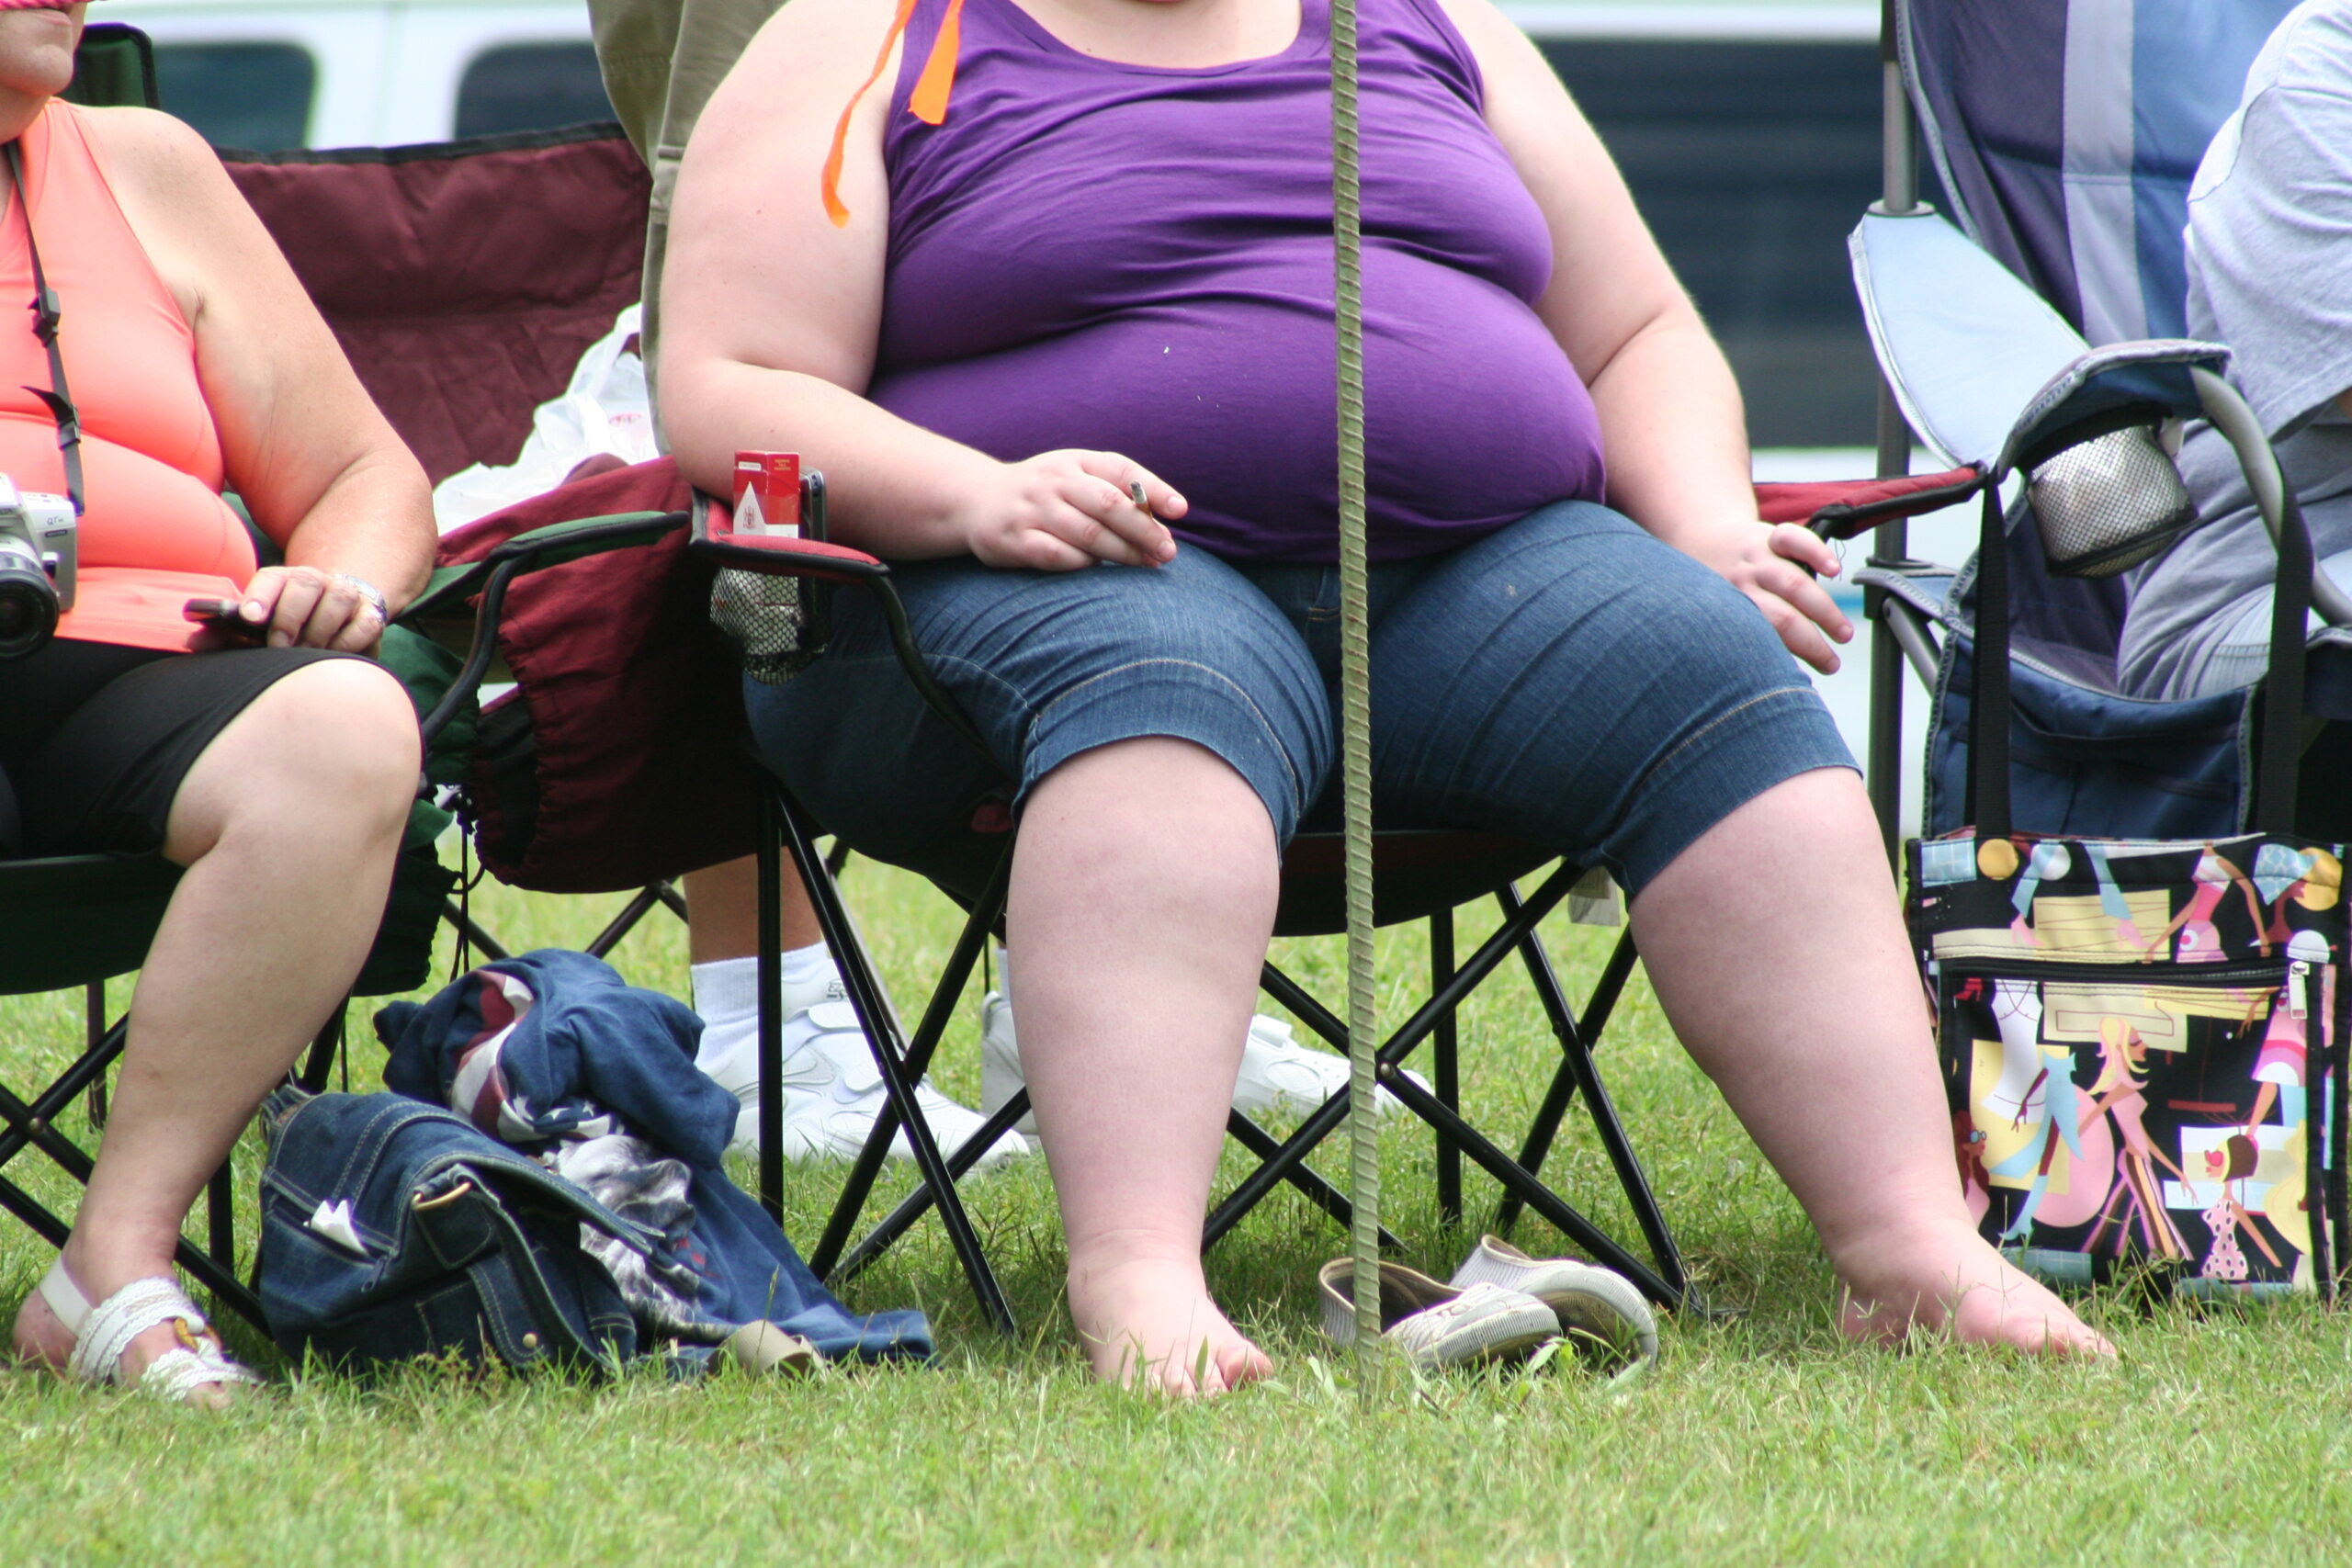 An overweight woman sitting in a chair, smoking.